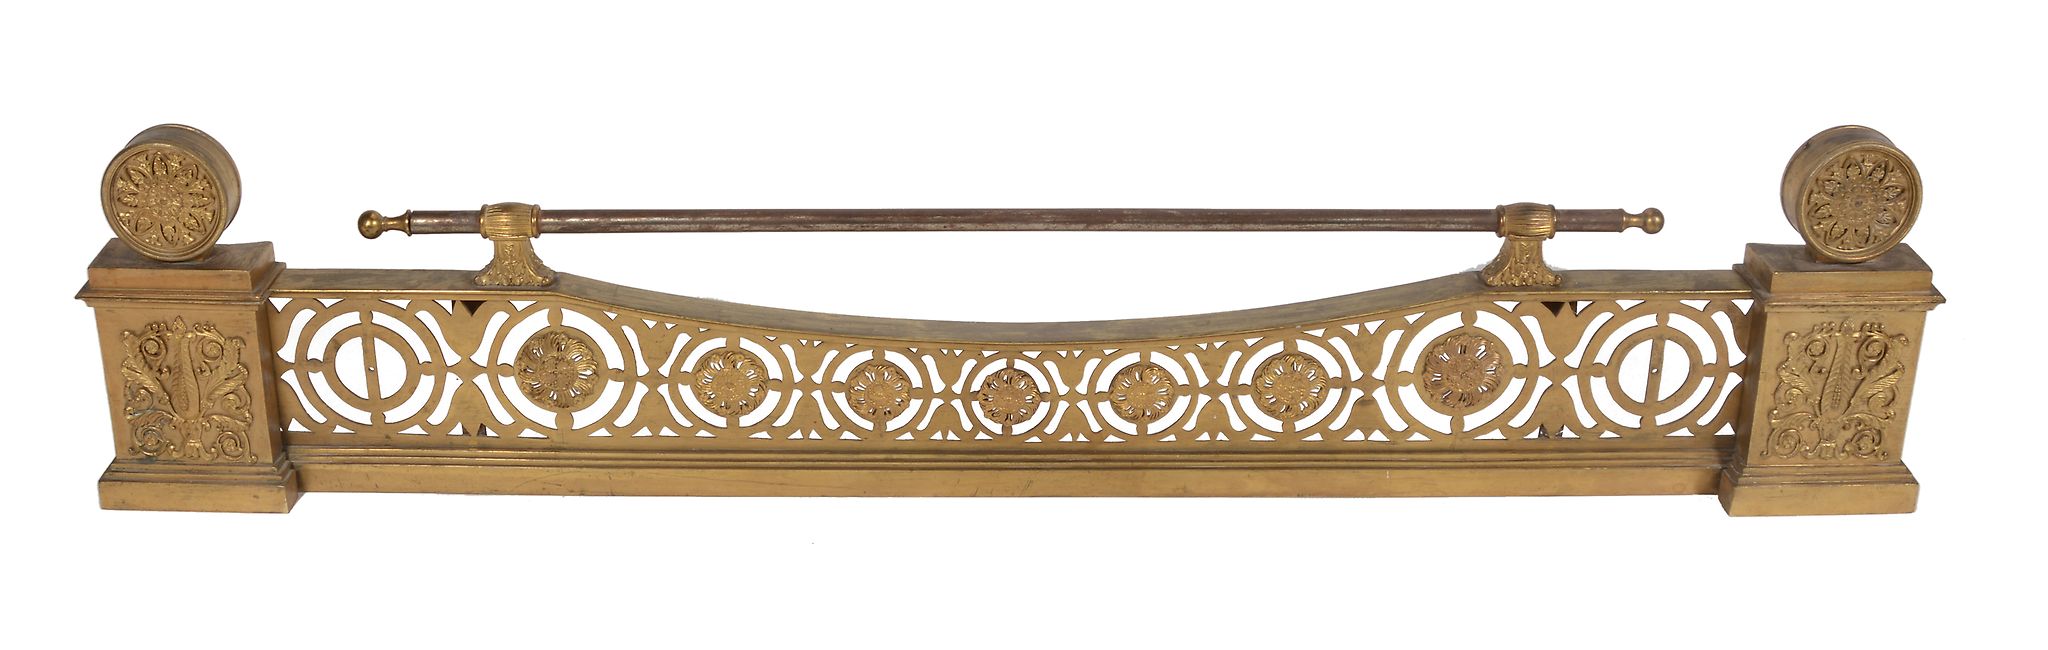 An Empire gilt bronze and iron mounted adjustable fender,   early 19th century, with horizontal